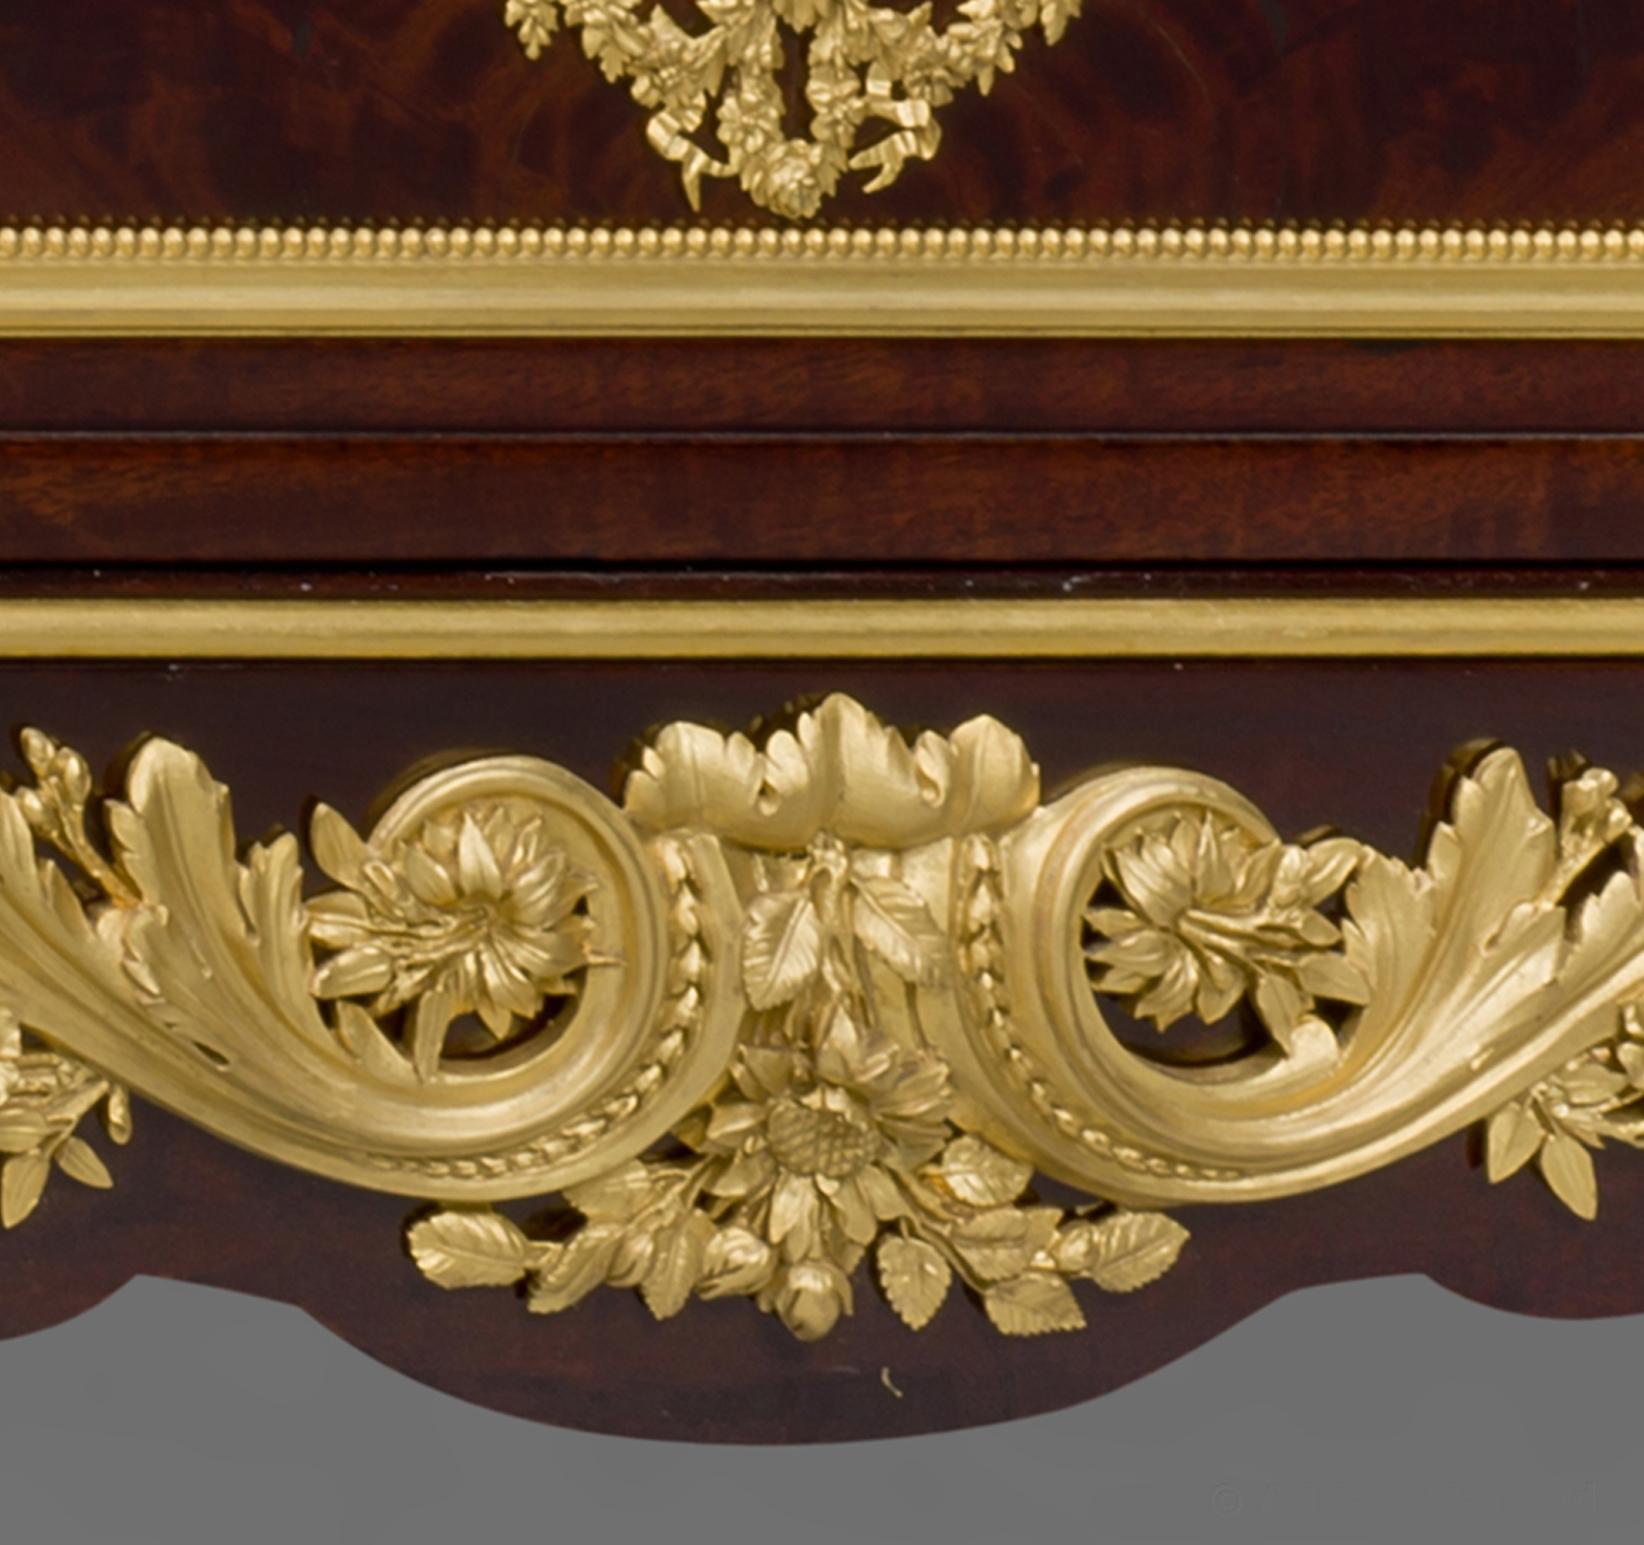 Gilt Louis XVI Style Commode after the Model by Jean-Henri Riesener, circa 1880 For Sale